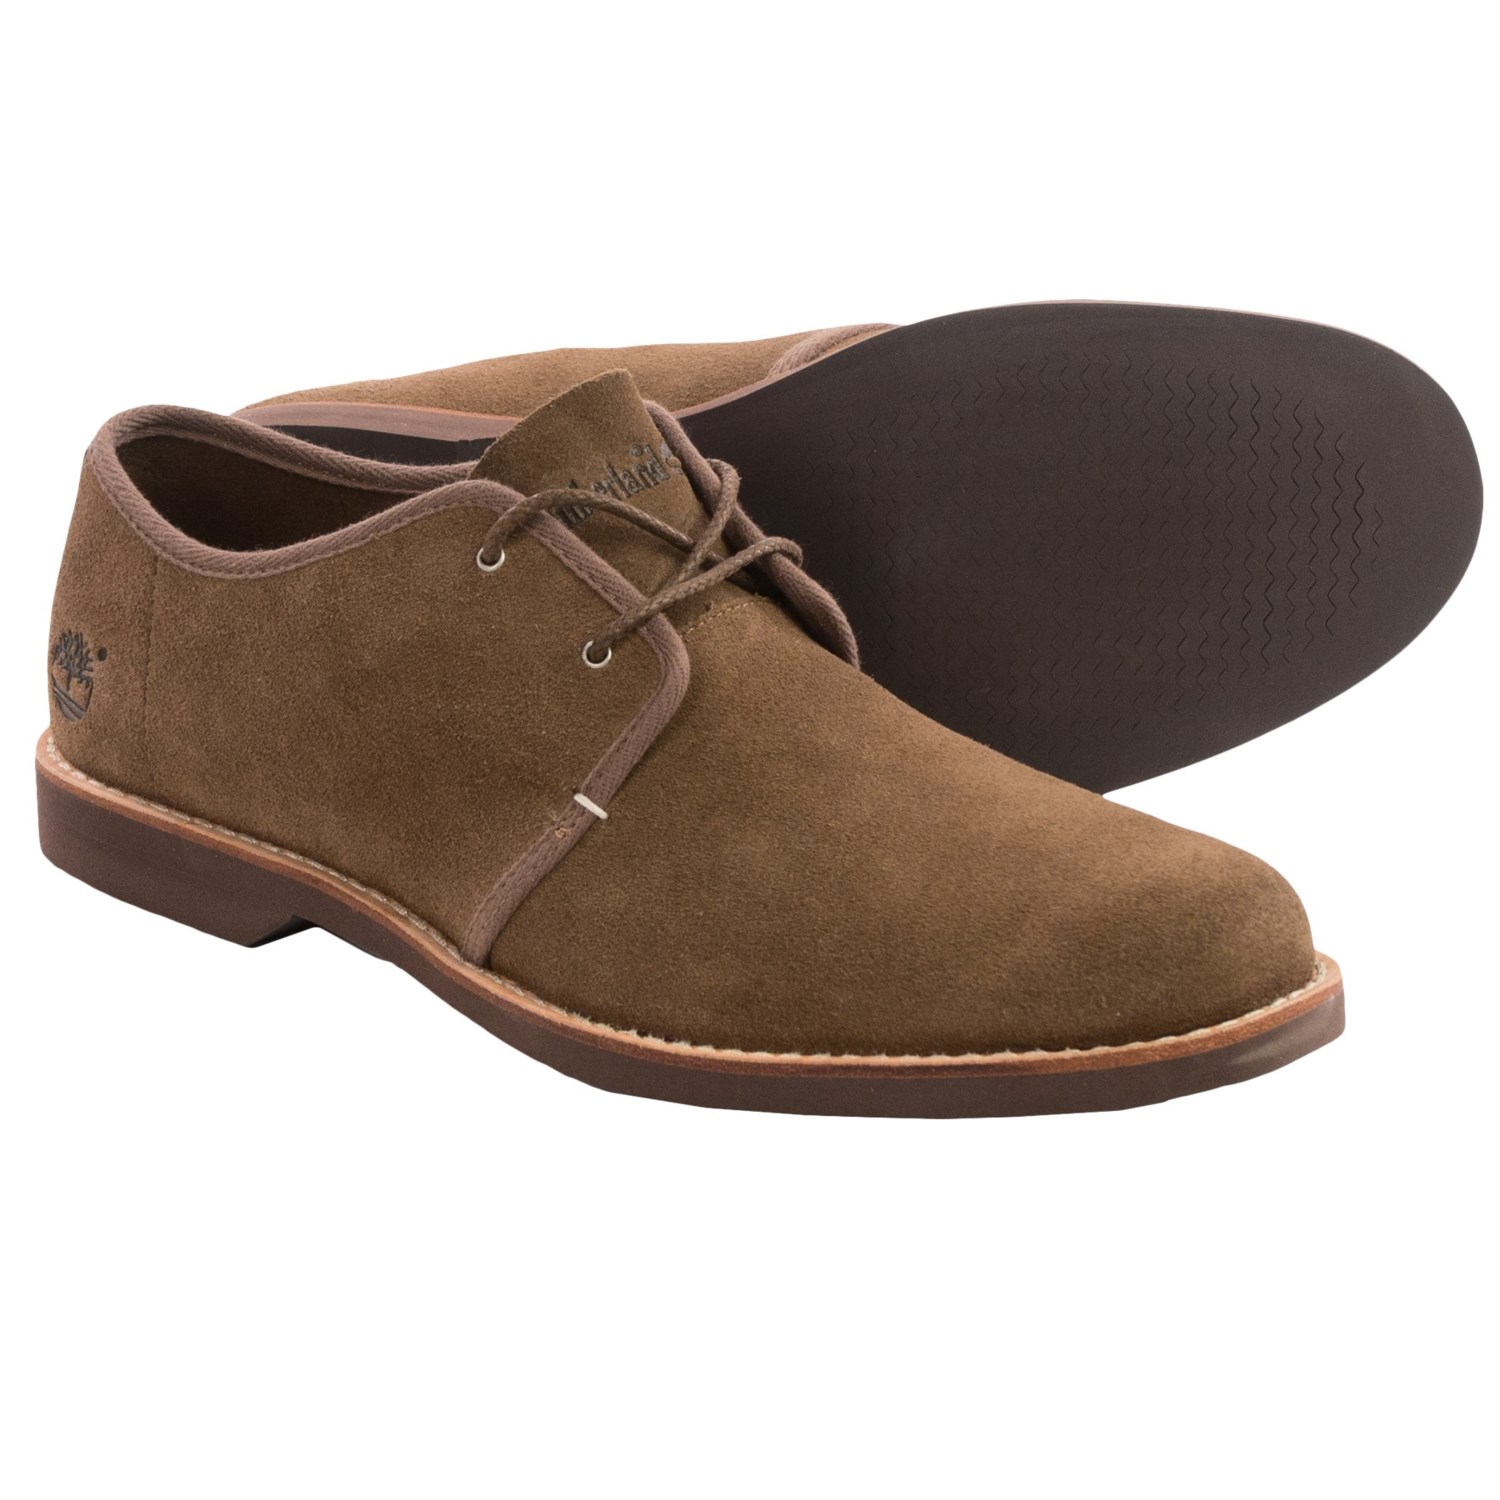 Timberland Earthkeepers Stormbuck Lite Suede Oxford Shoes (For Men ...